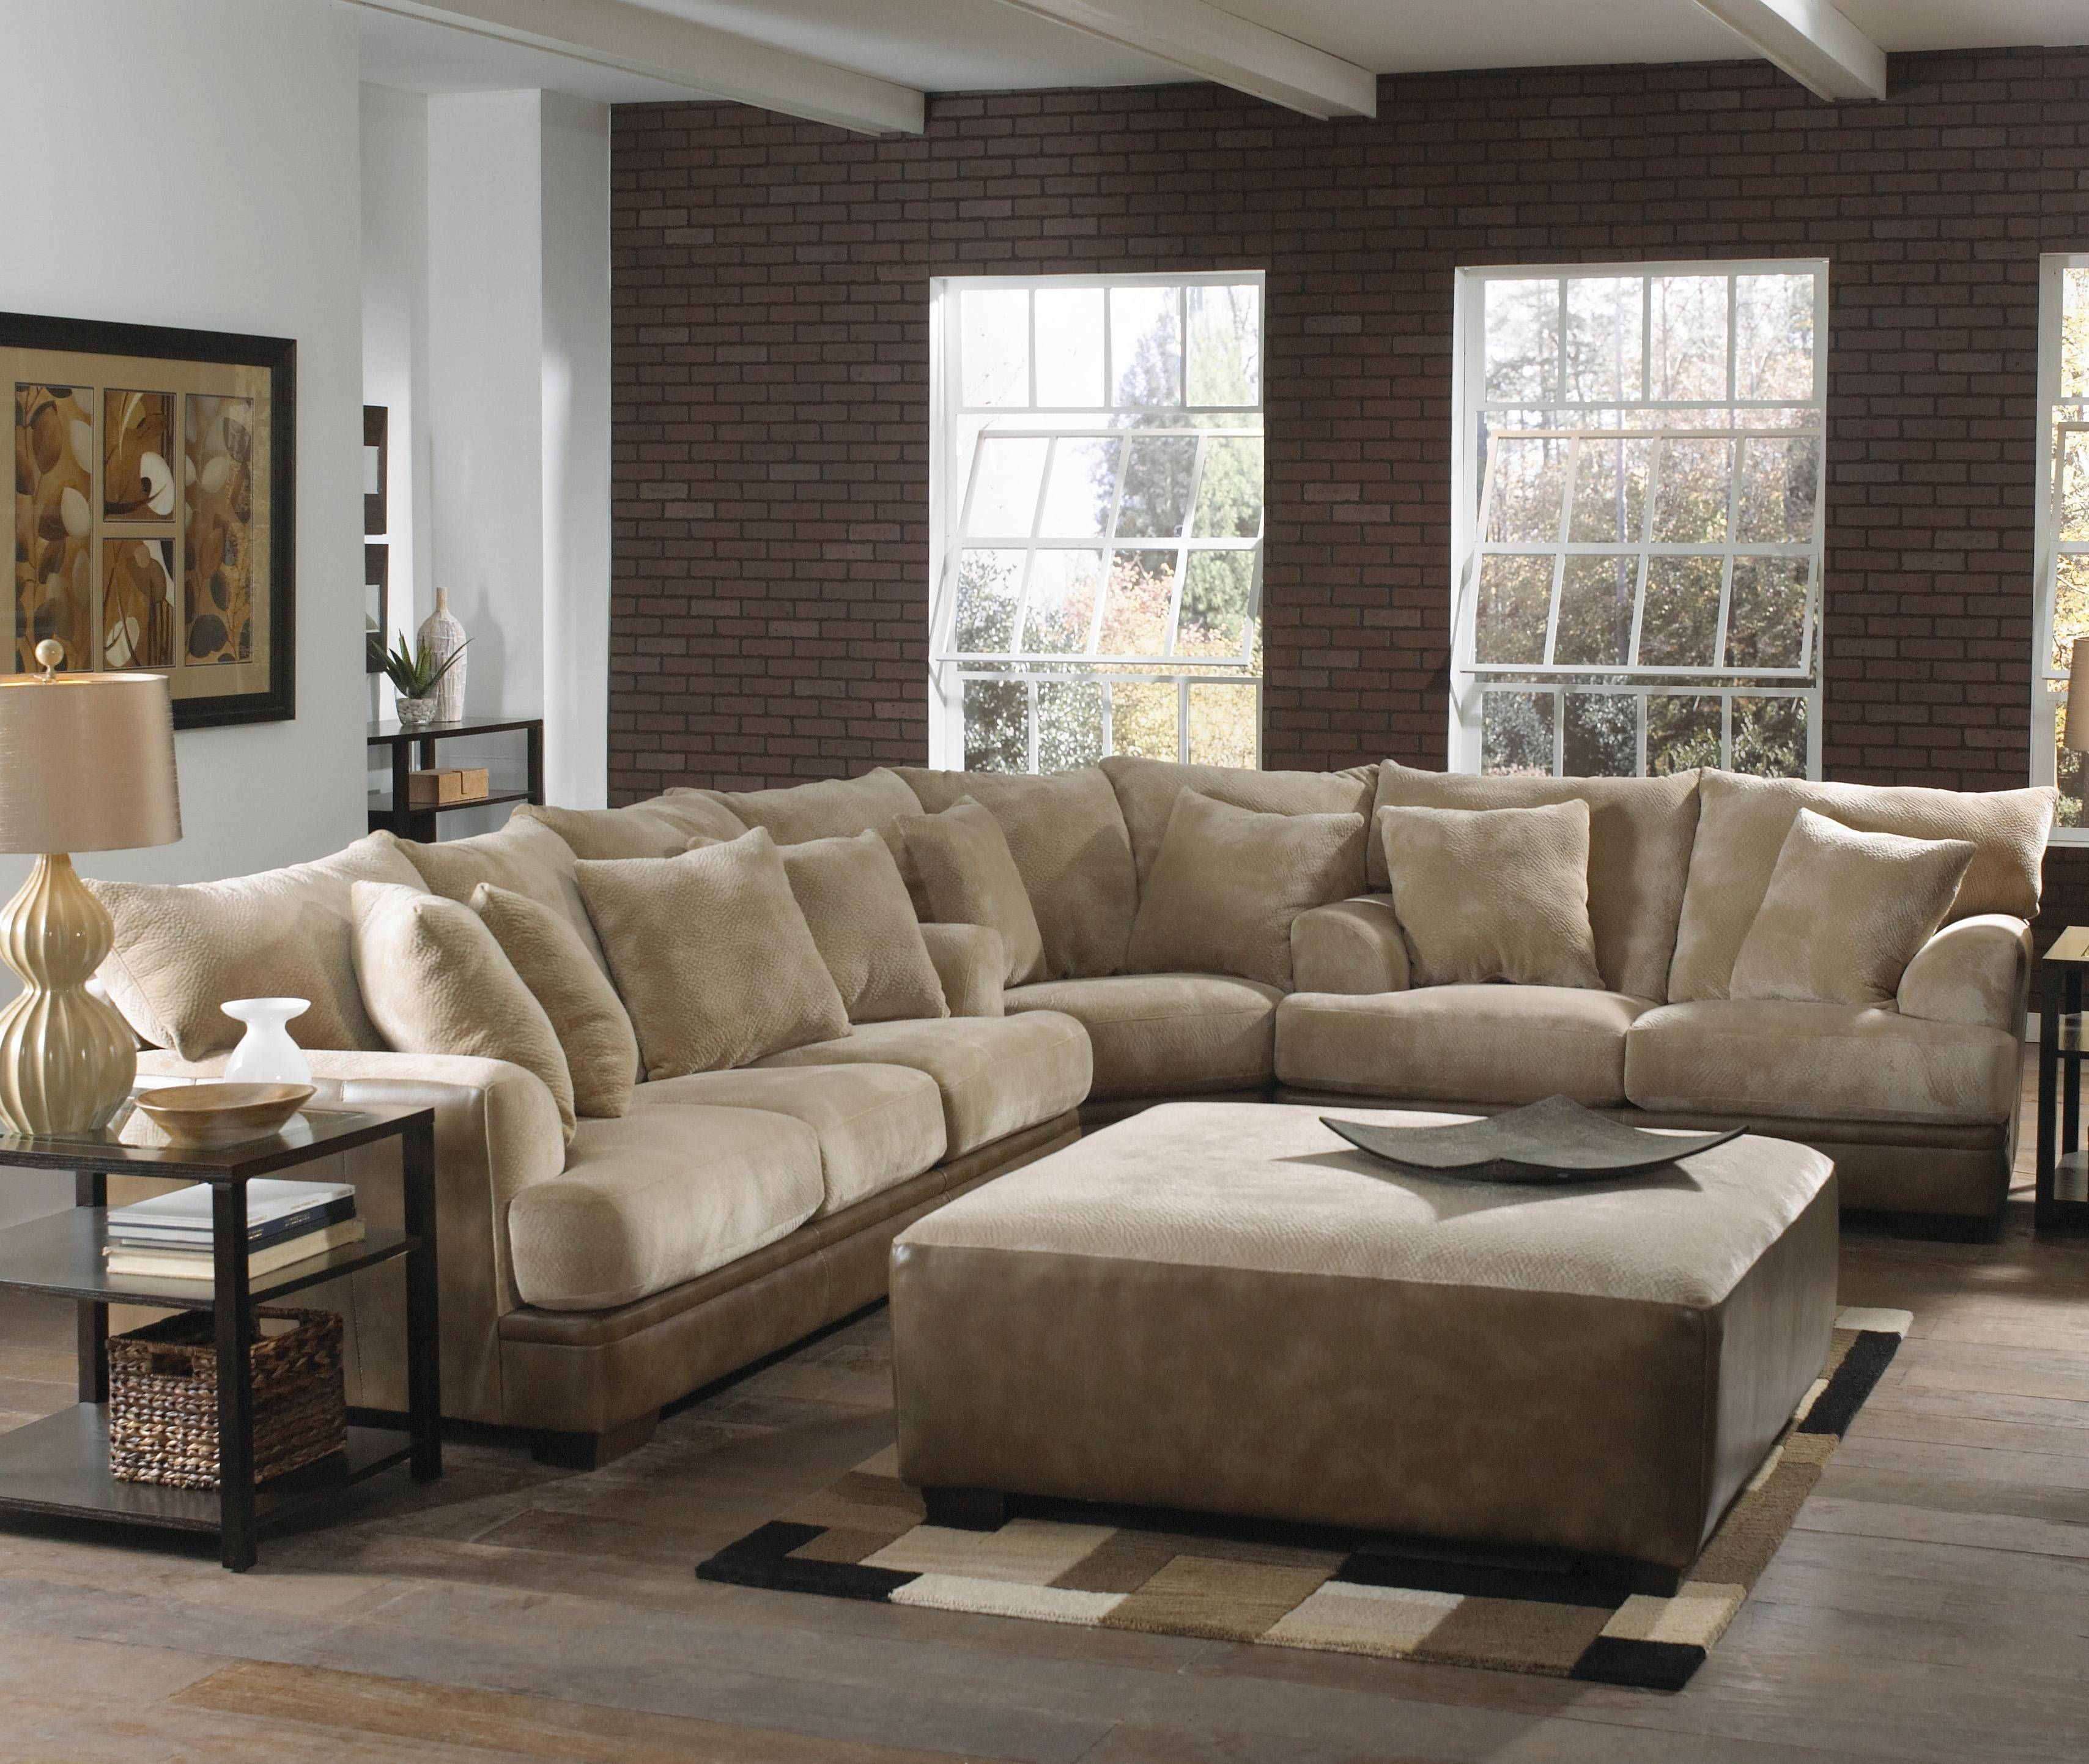 Furniture: Interesting Living Room Interior Using Large Sectional Throughout Extra Large Sectional Sofas (View 3 of 30)